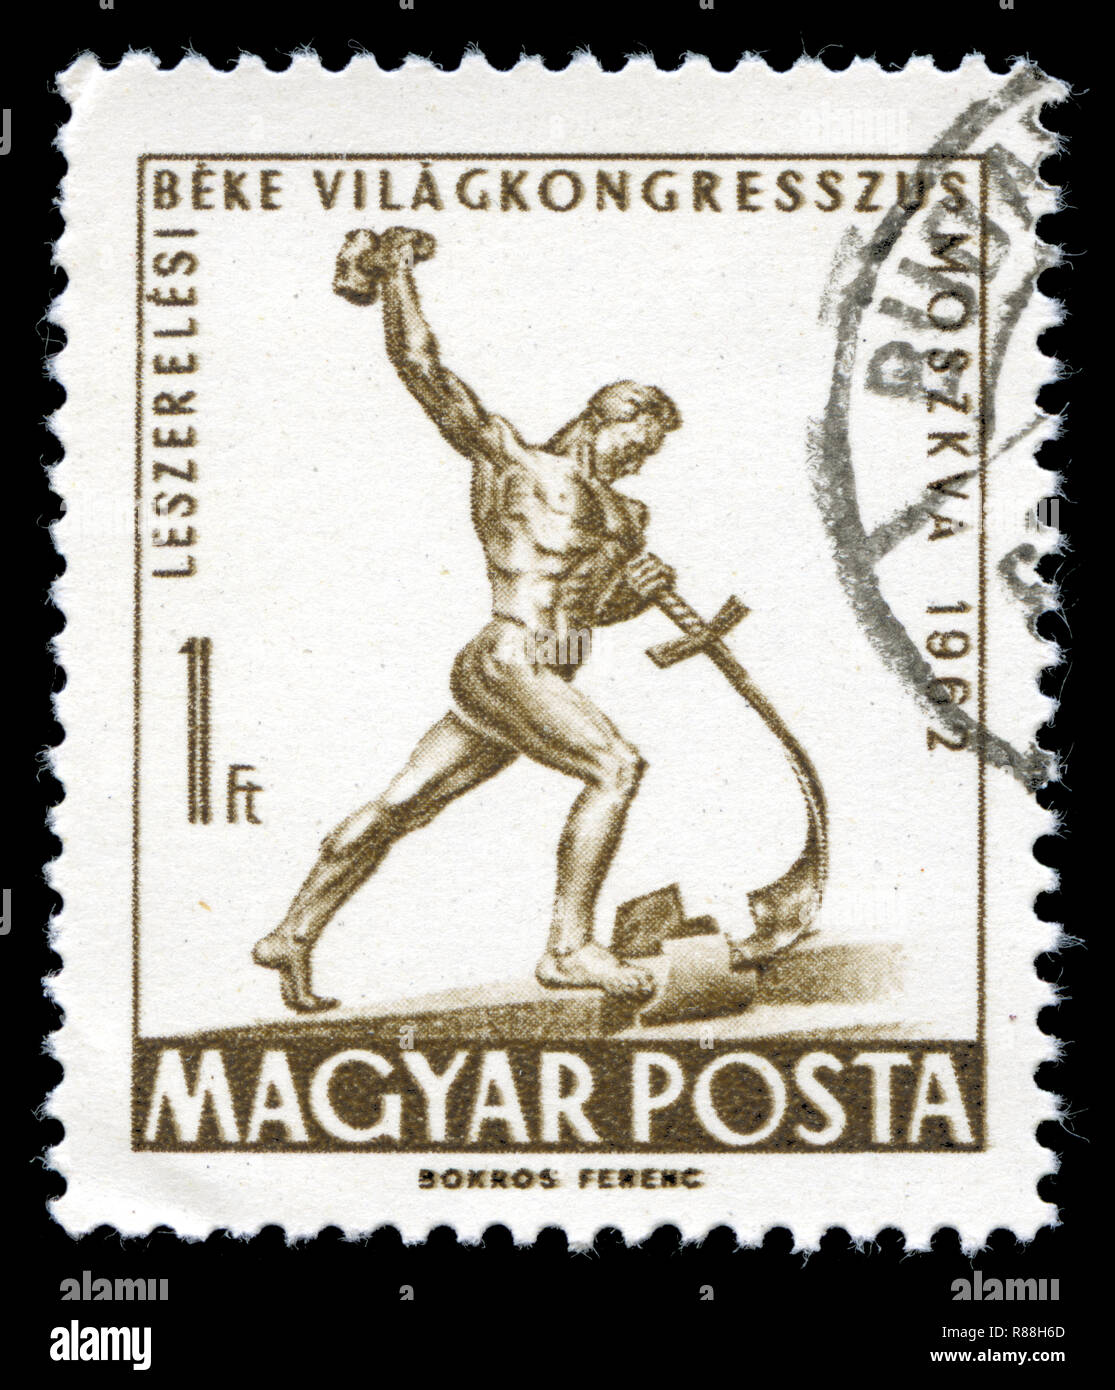 Postage stamp from Hungary in the Disarmament Conference series issued in 1962 Stock Photo